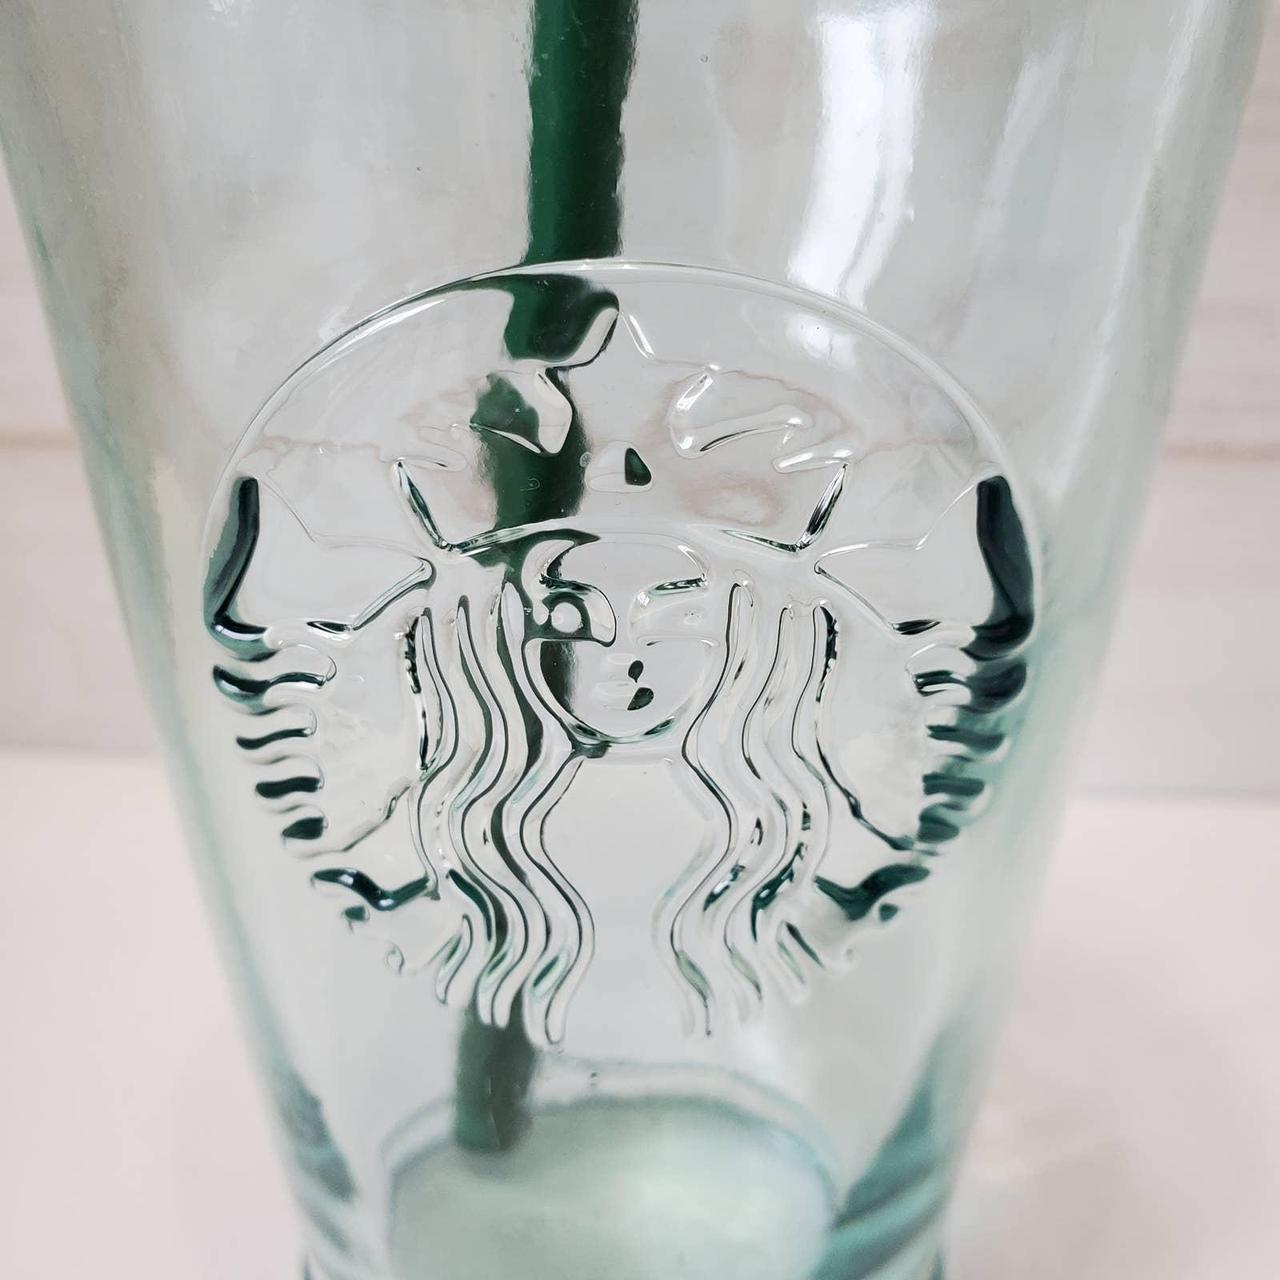 Starbucks Recycled Glass Cold Cup 16fl oz.